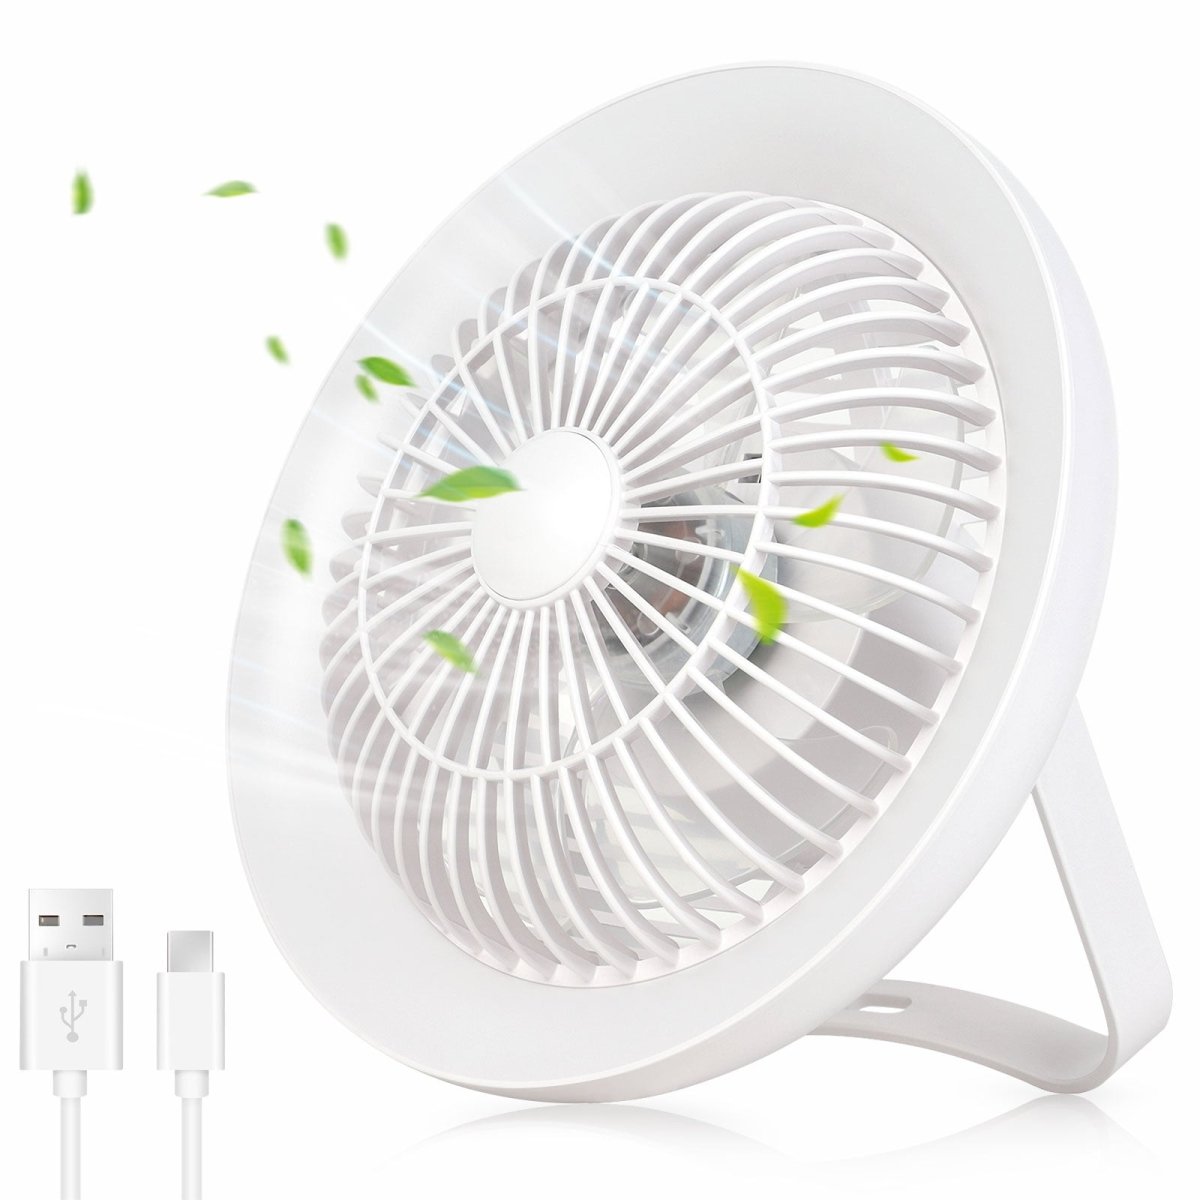 Depuley Portable Desk Fan with LED Light, 8" Small Desk Fan for Hanging or Tabletop Use, 4000mAH Outdoor Small Fan Rechargeable Quiet Camping USB Desk Fan with 3 Speeds - WS-FPZ35-6A-NEW 2 | DEPULEY